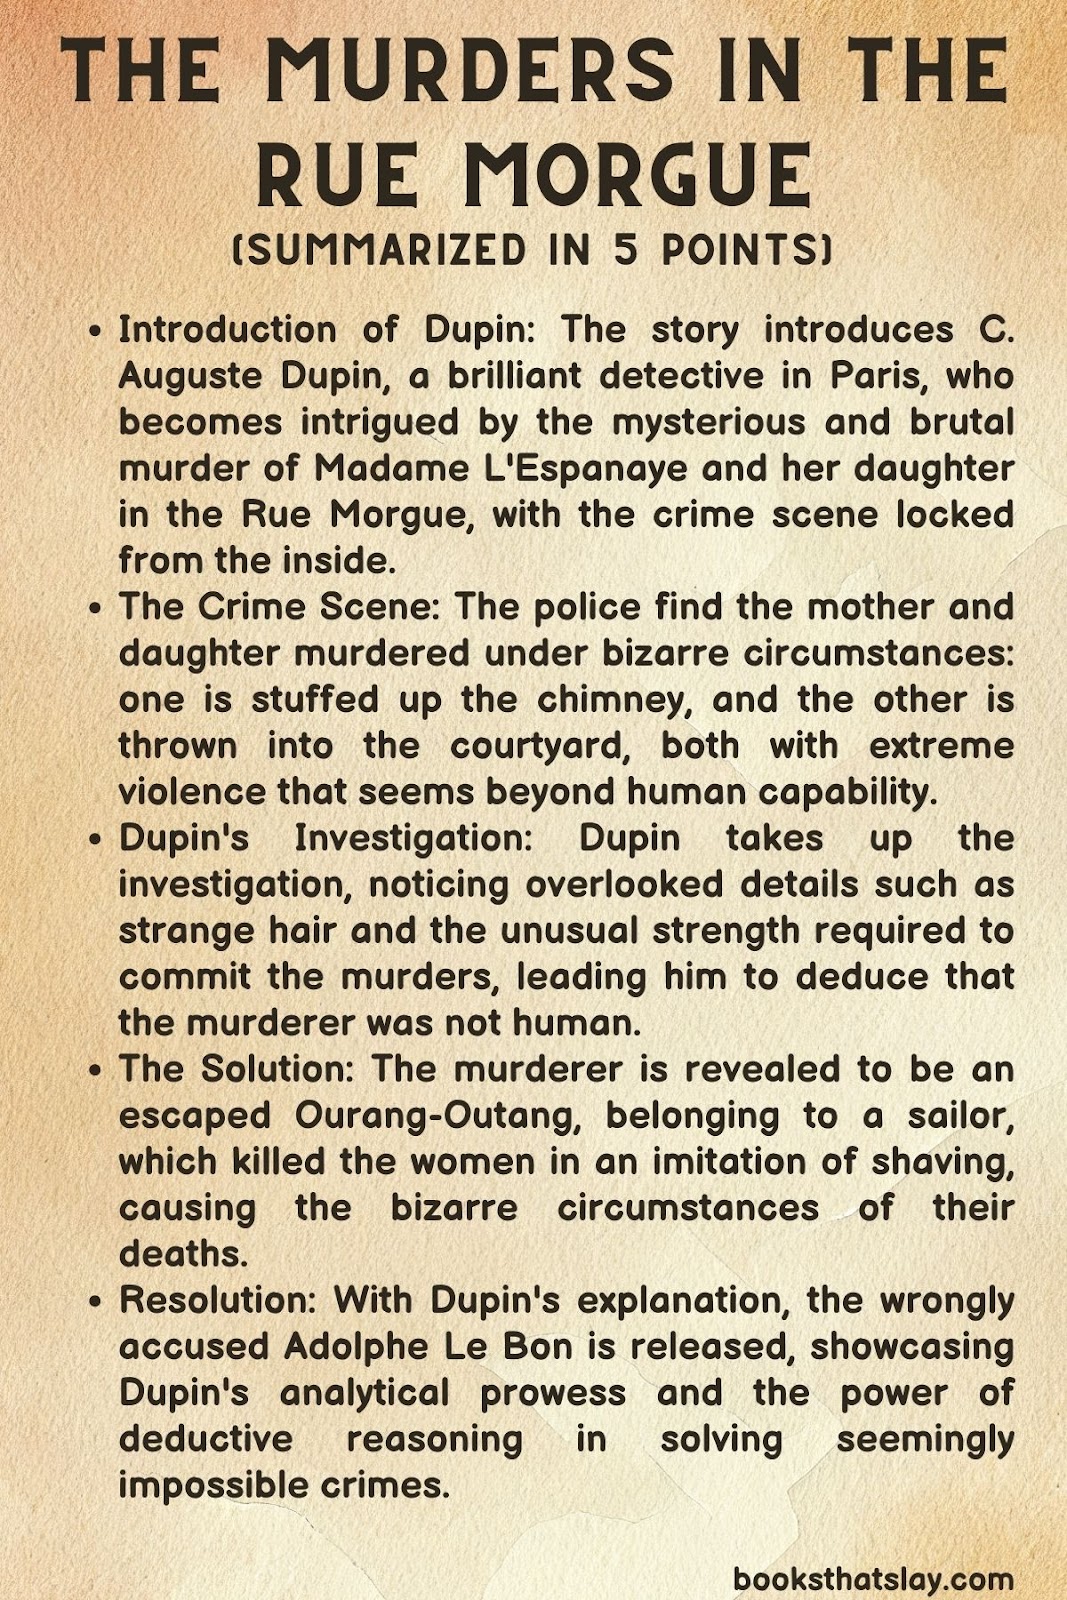 The Murders in the Rue Morgue Summary